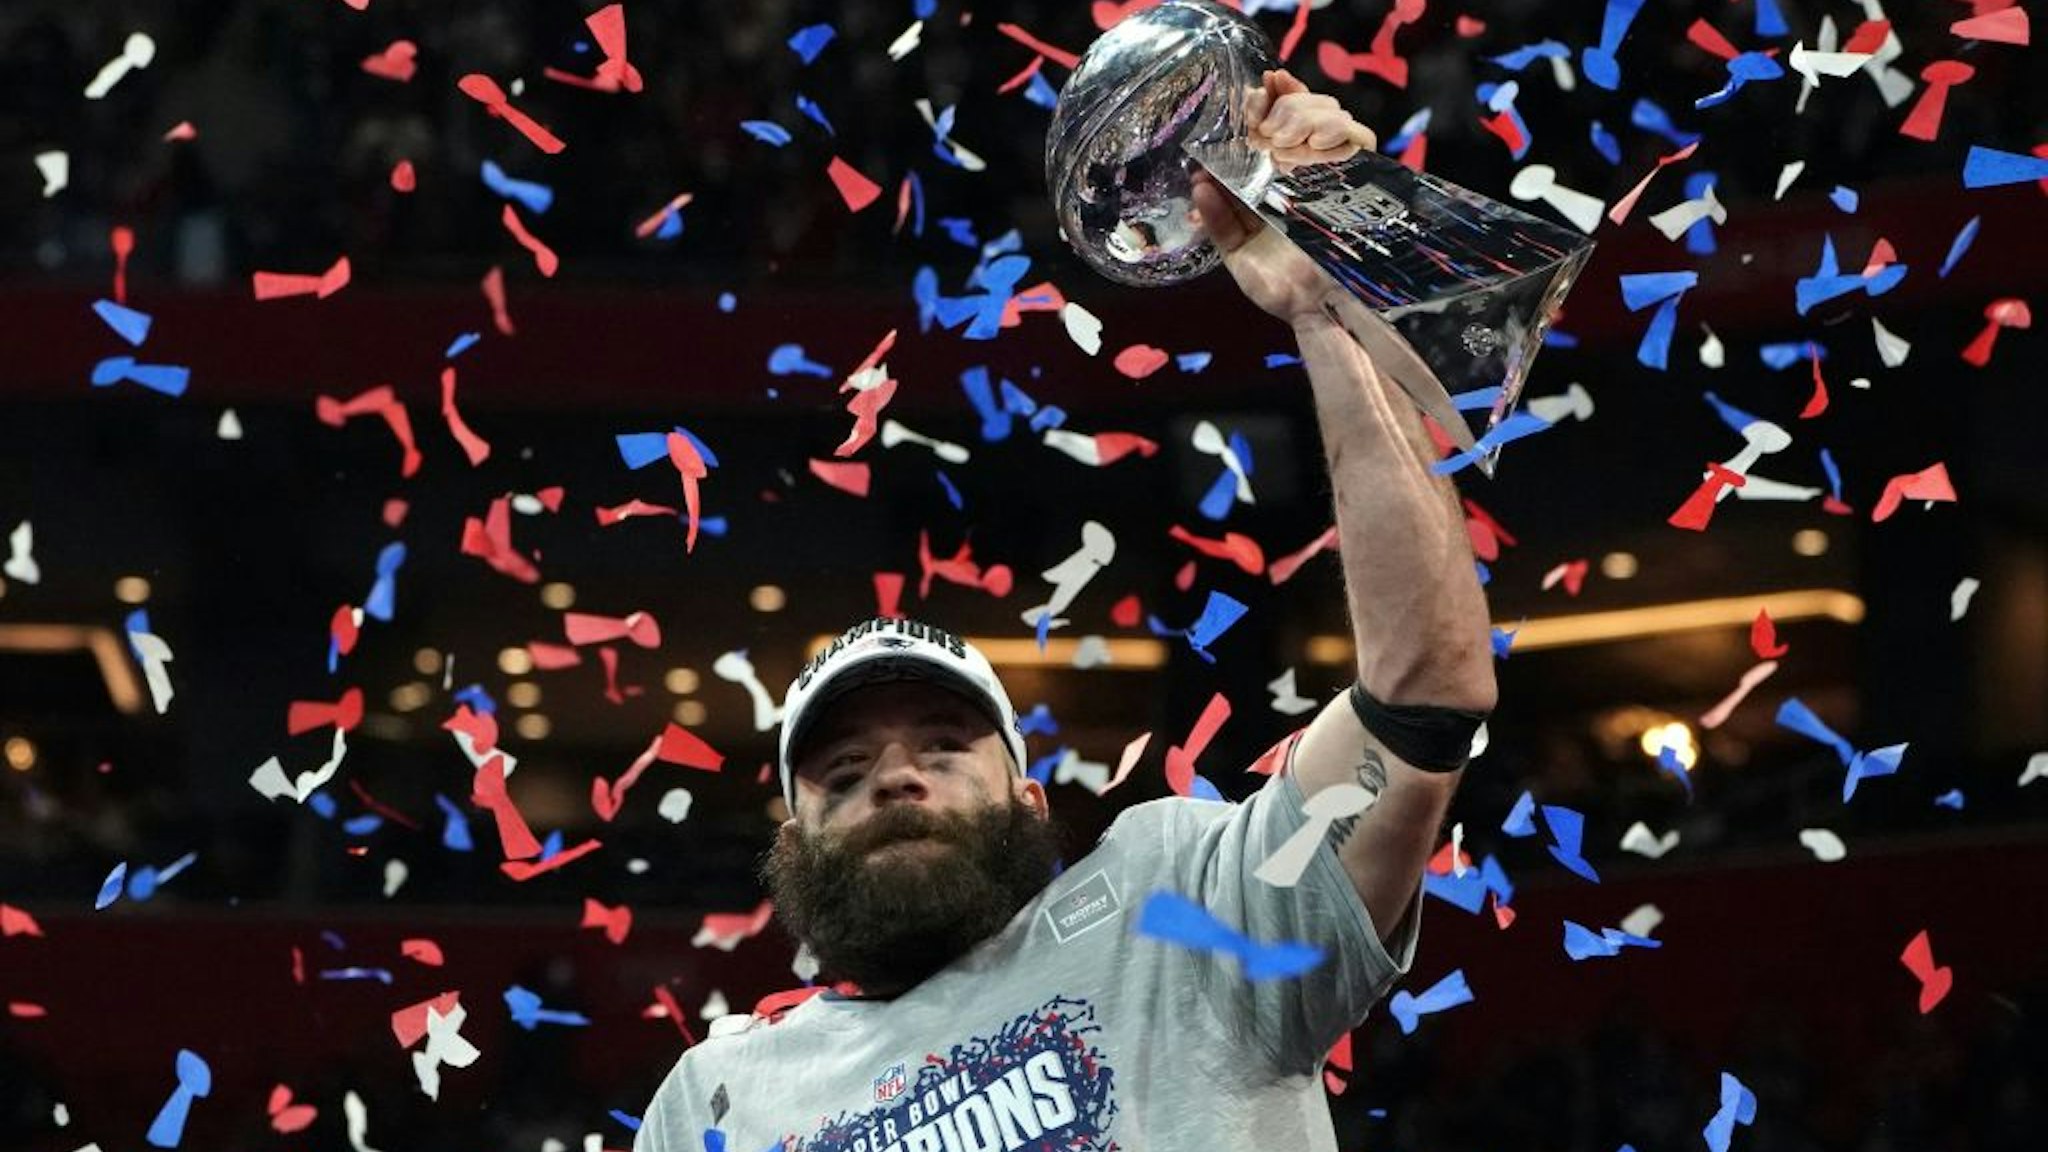 TOPSHOT - Wide receiver for the New England Patriots Julian Edelman holds the trophy as he celebrates Super Bowl LIII against the Los Angeles Rams at Mercedes-Benz Stadium in Atlanta, Georgia, on February 3, 2019. (Photo by TIMOTHY A. CLARY / AFP) (Photo credit should read TIMOTHY A. CLARY/AFP via Getty Images)